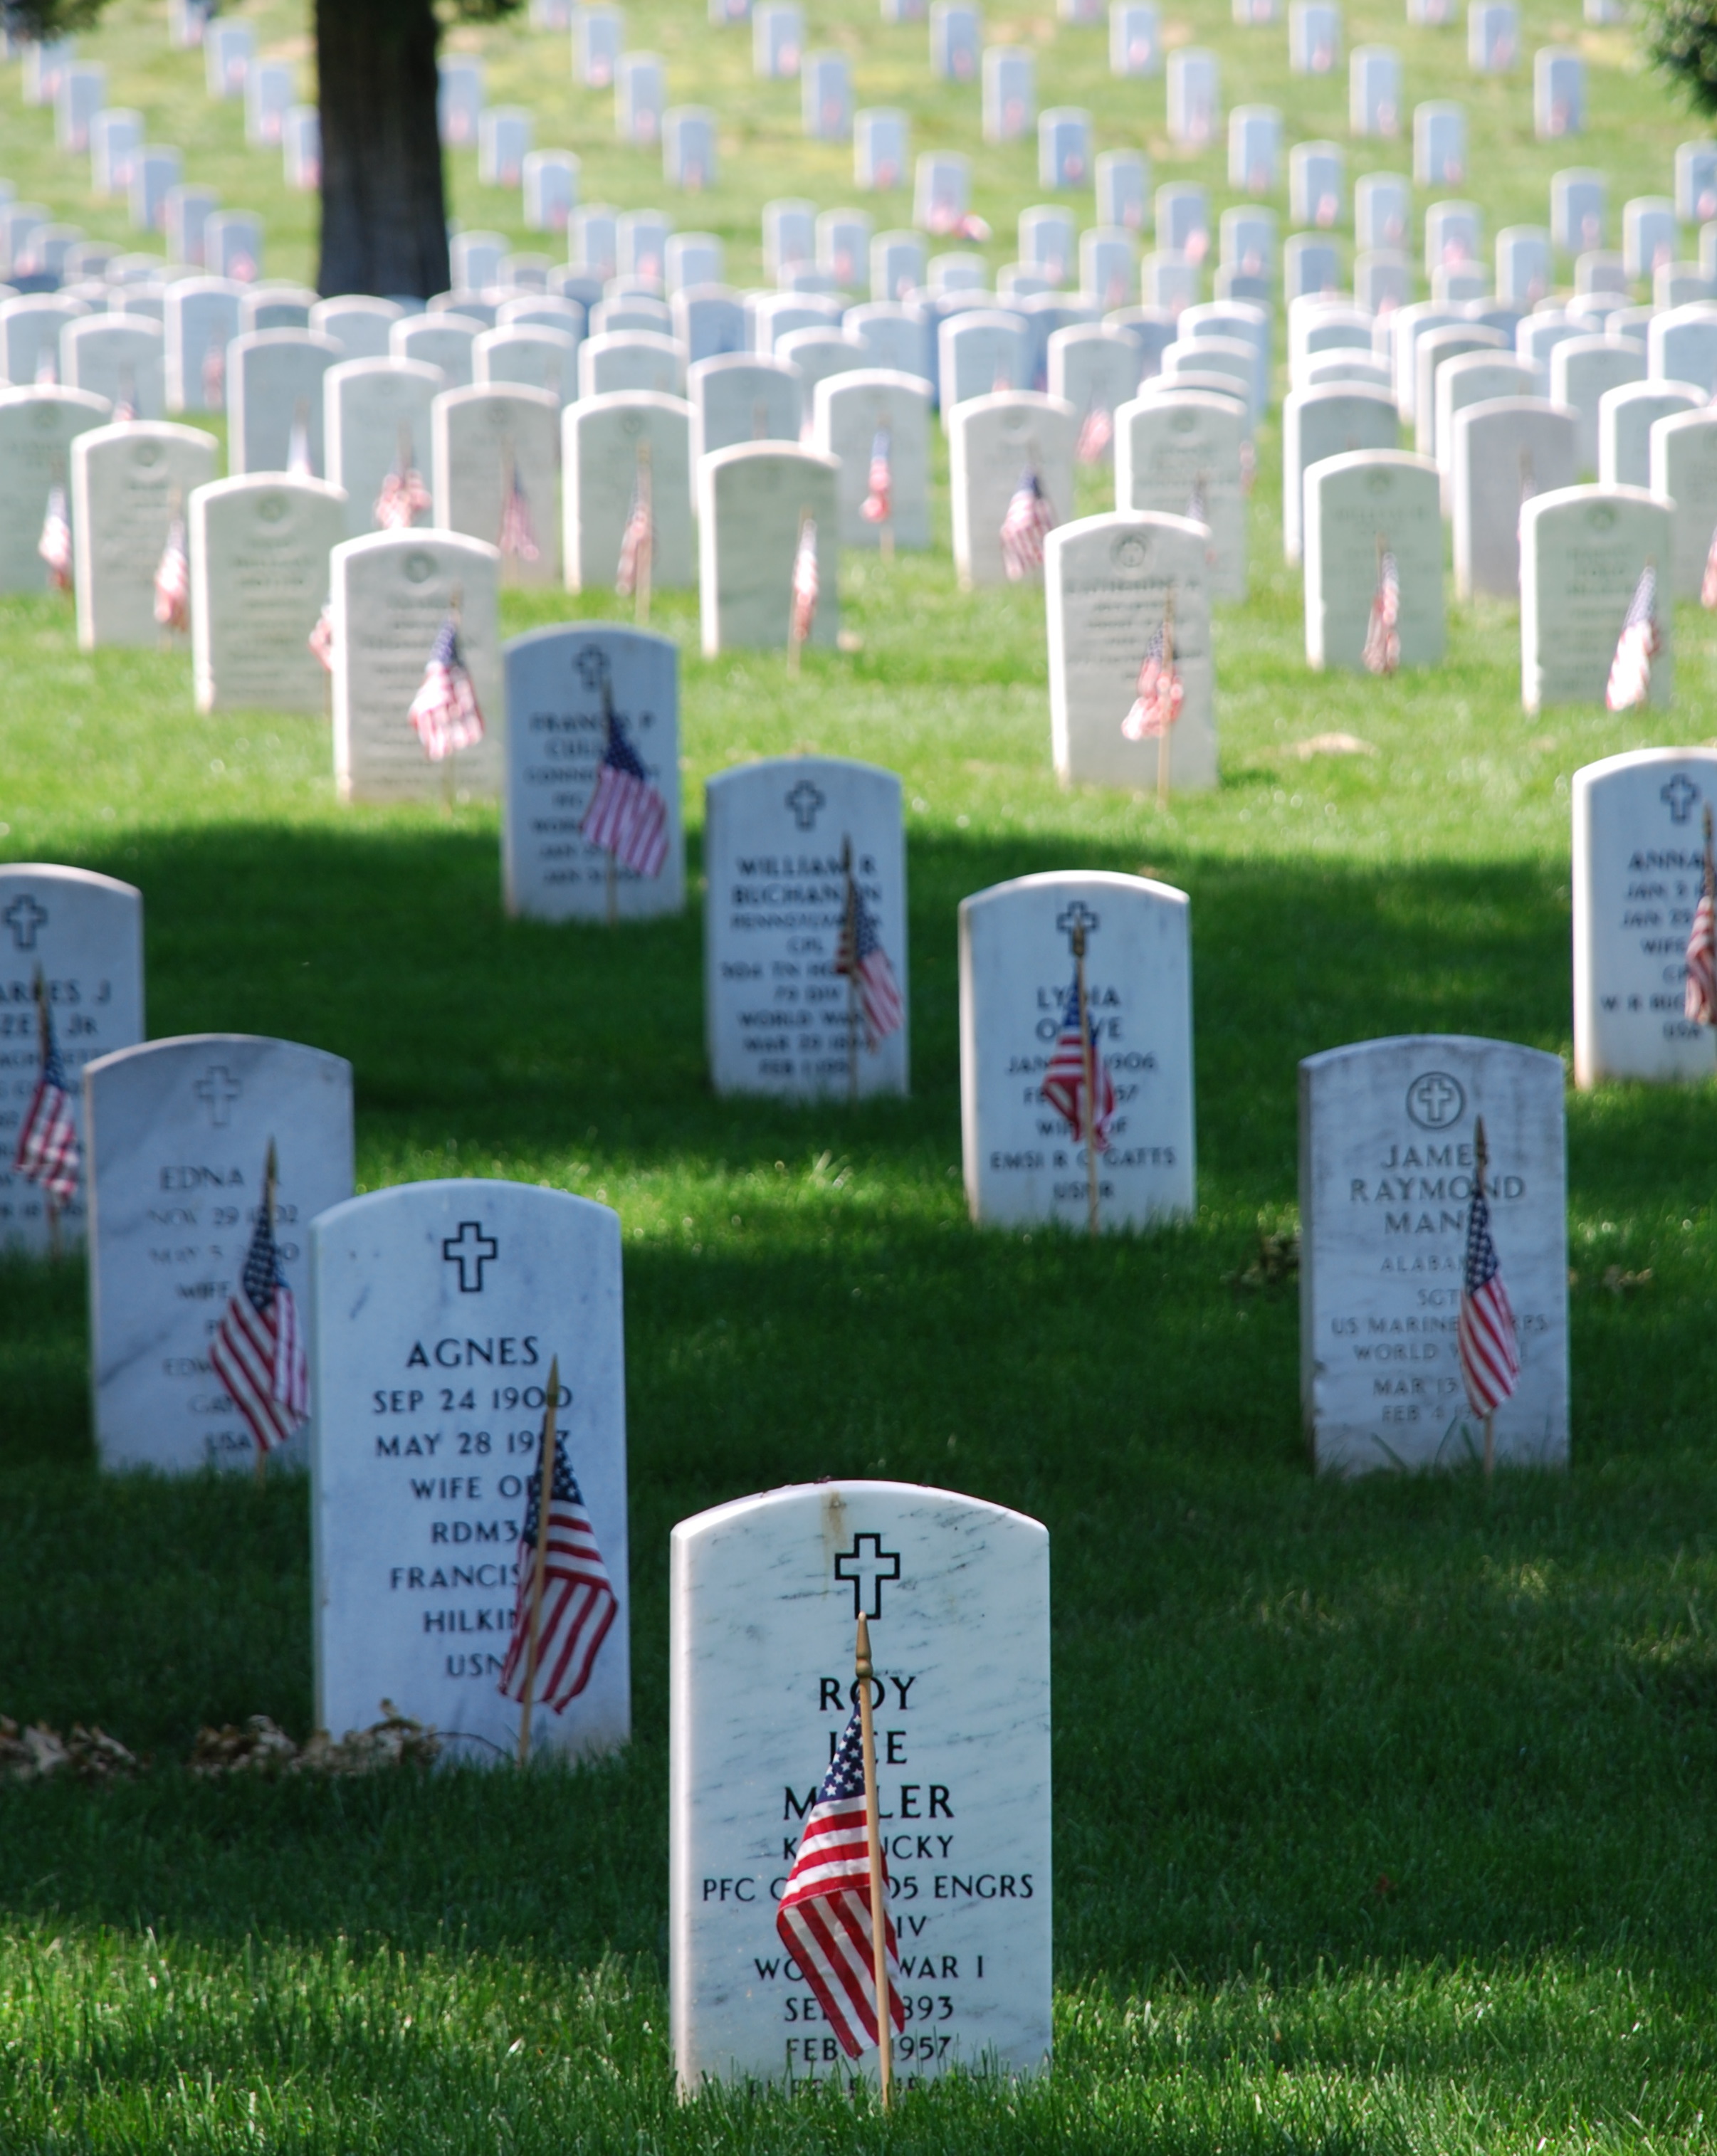 Image of gravestones at a military cemetery